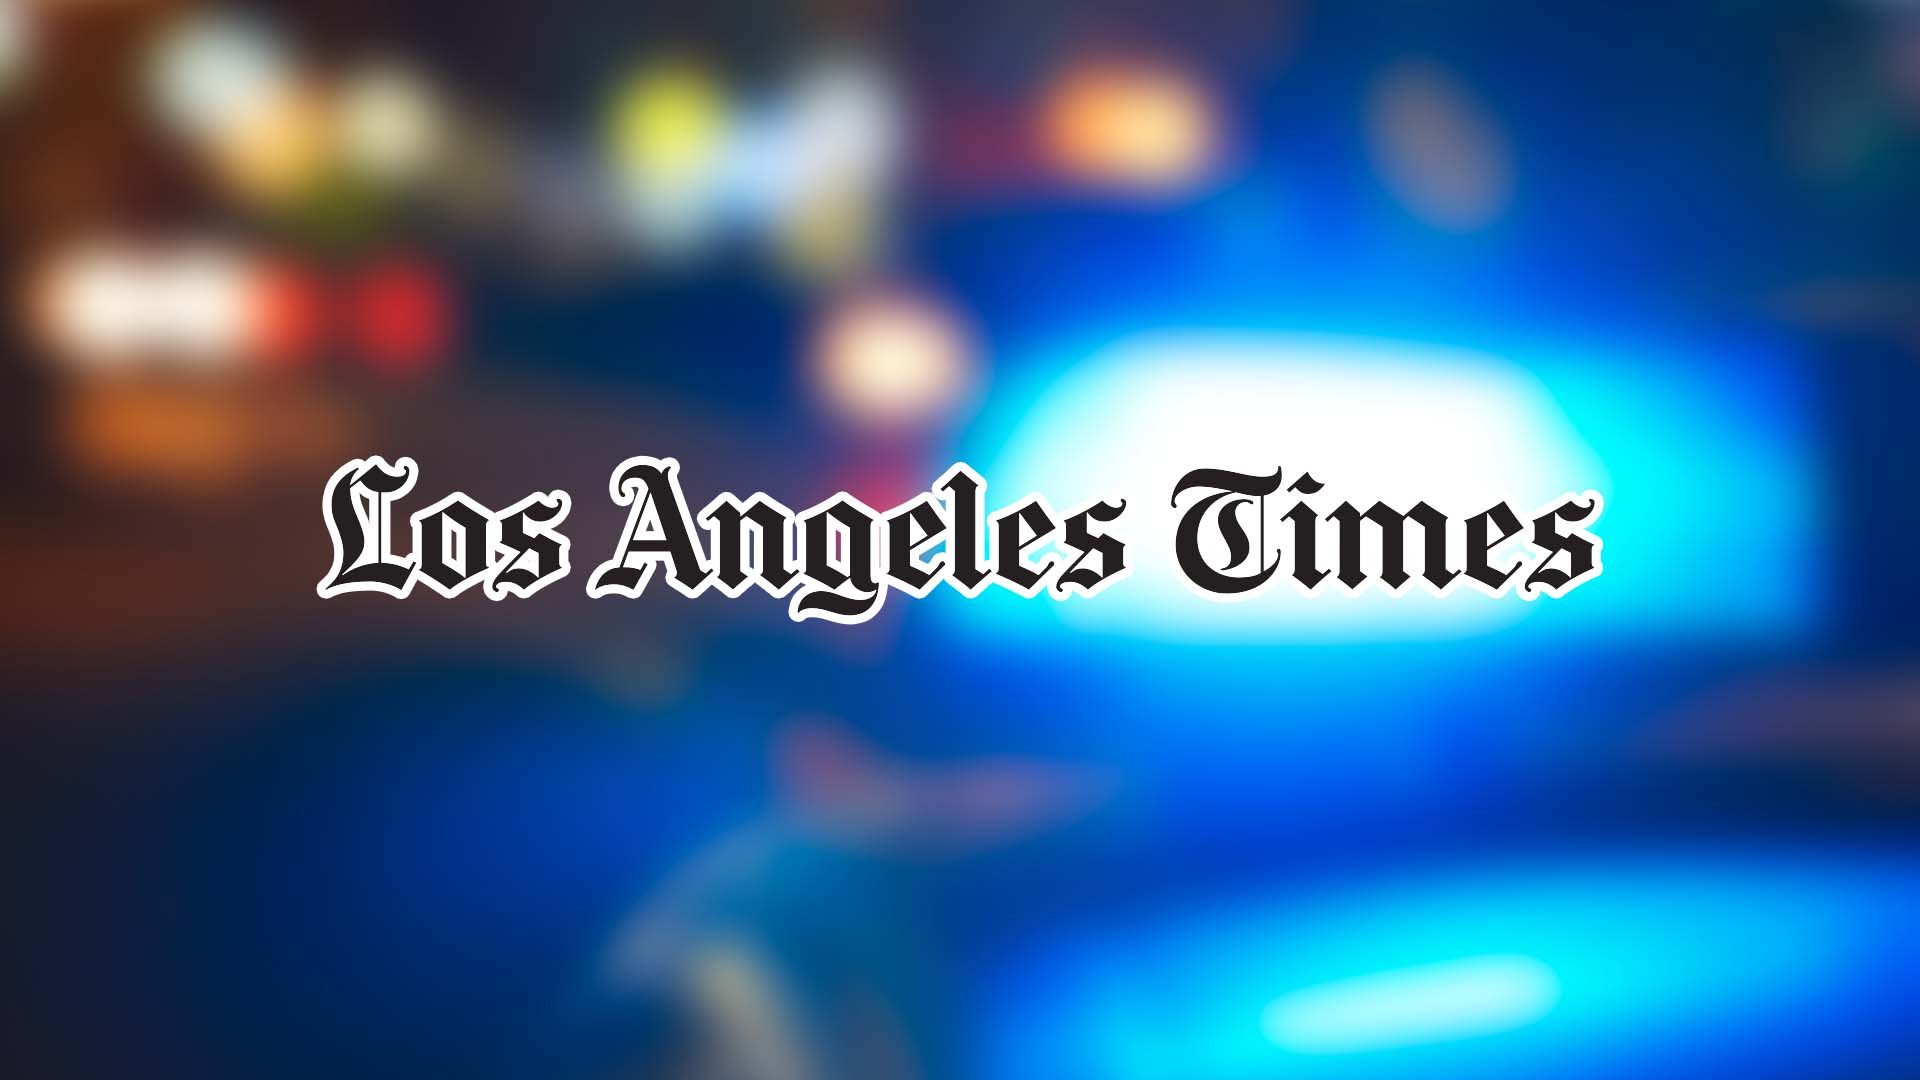 LA Times Human-trafficking sweep leads to 153 prostitution-related arrests and rescue of 10 sex-trafficking victims